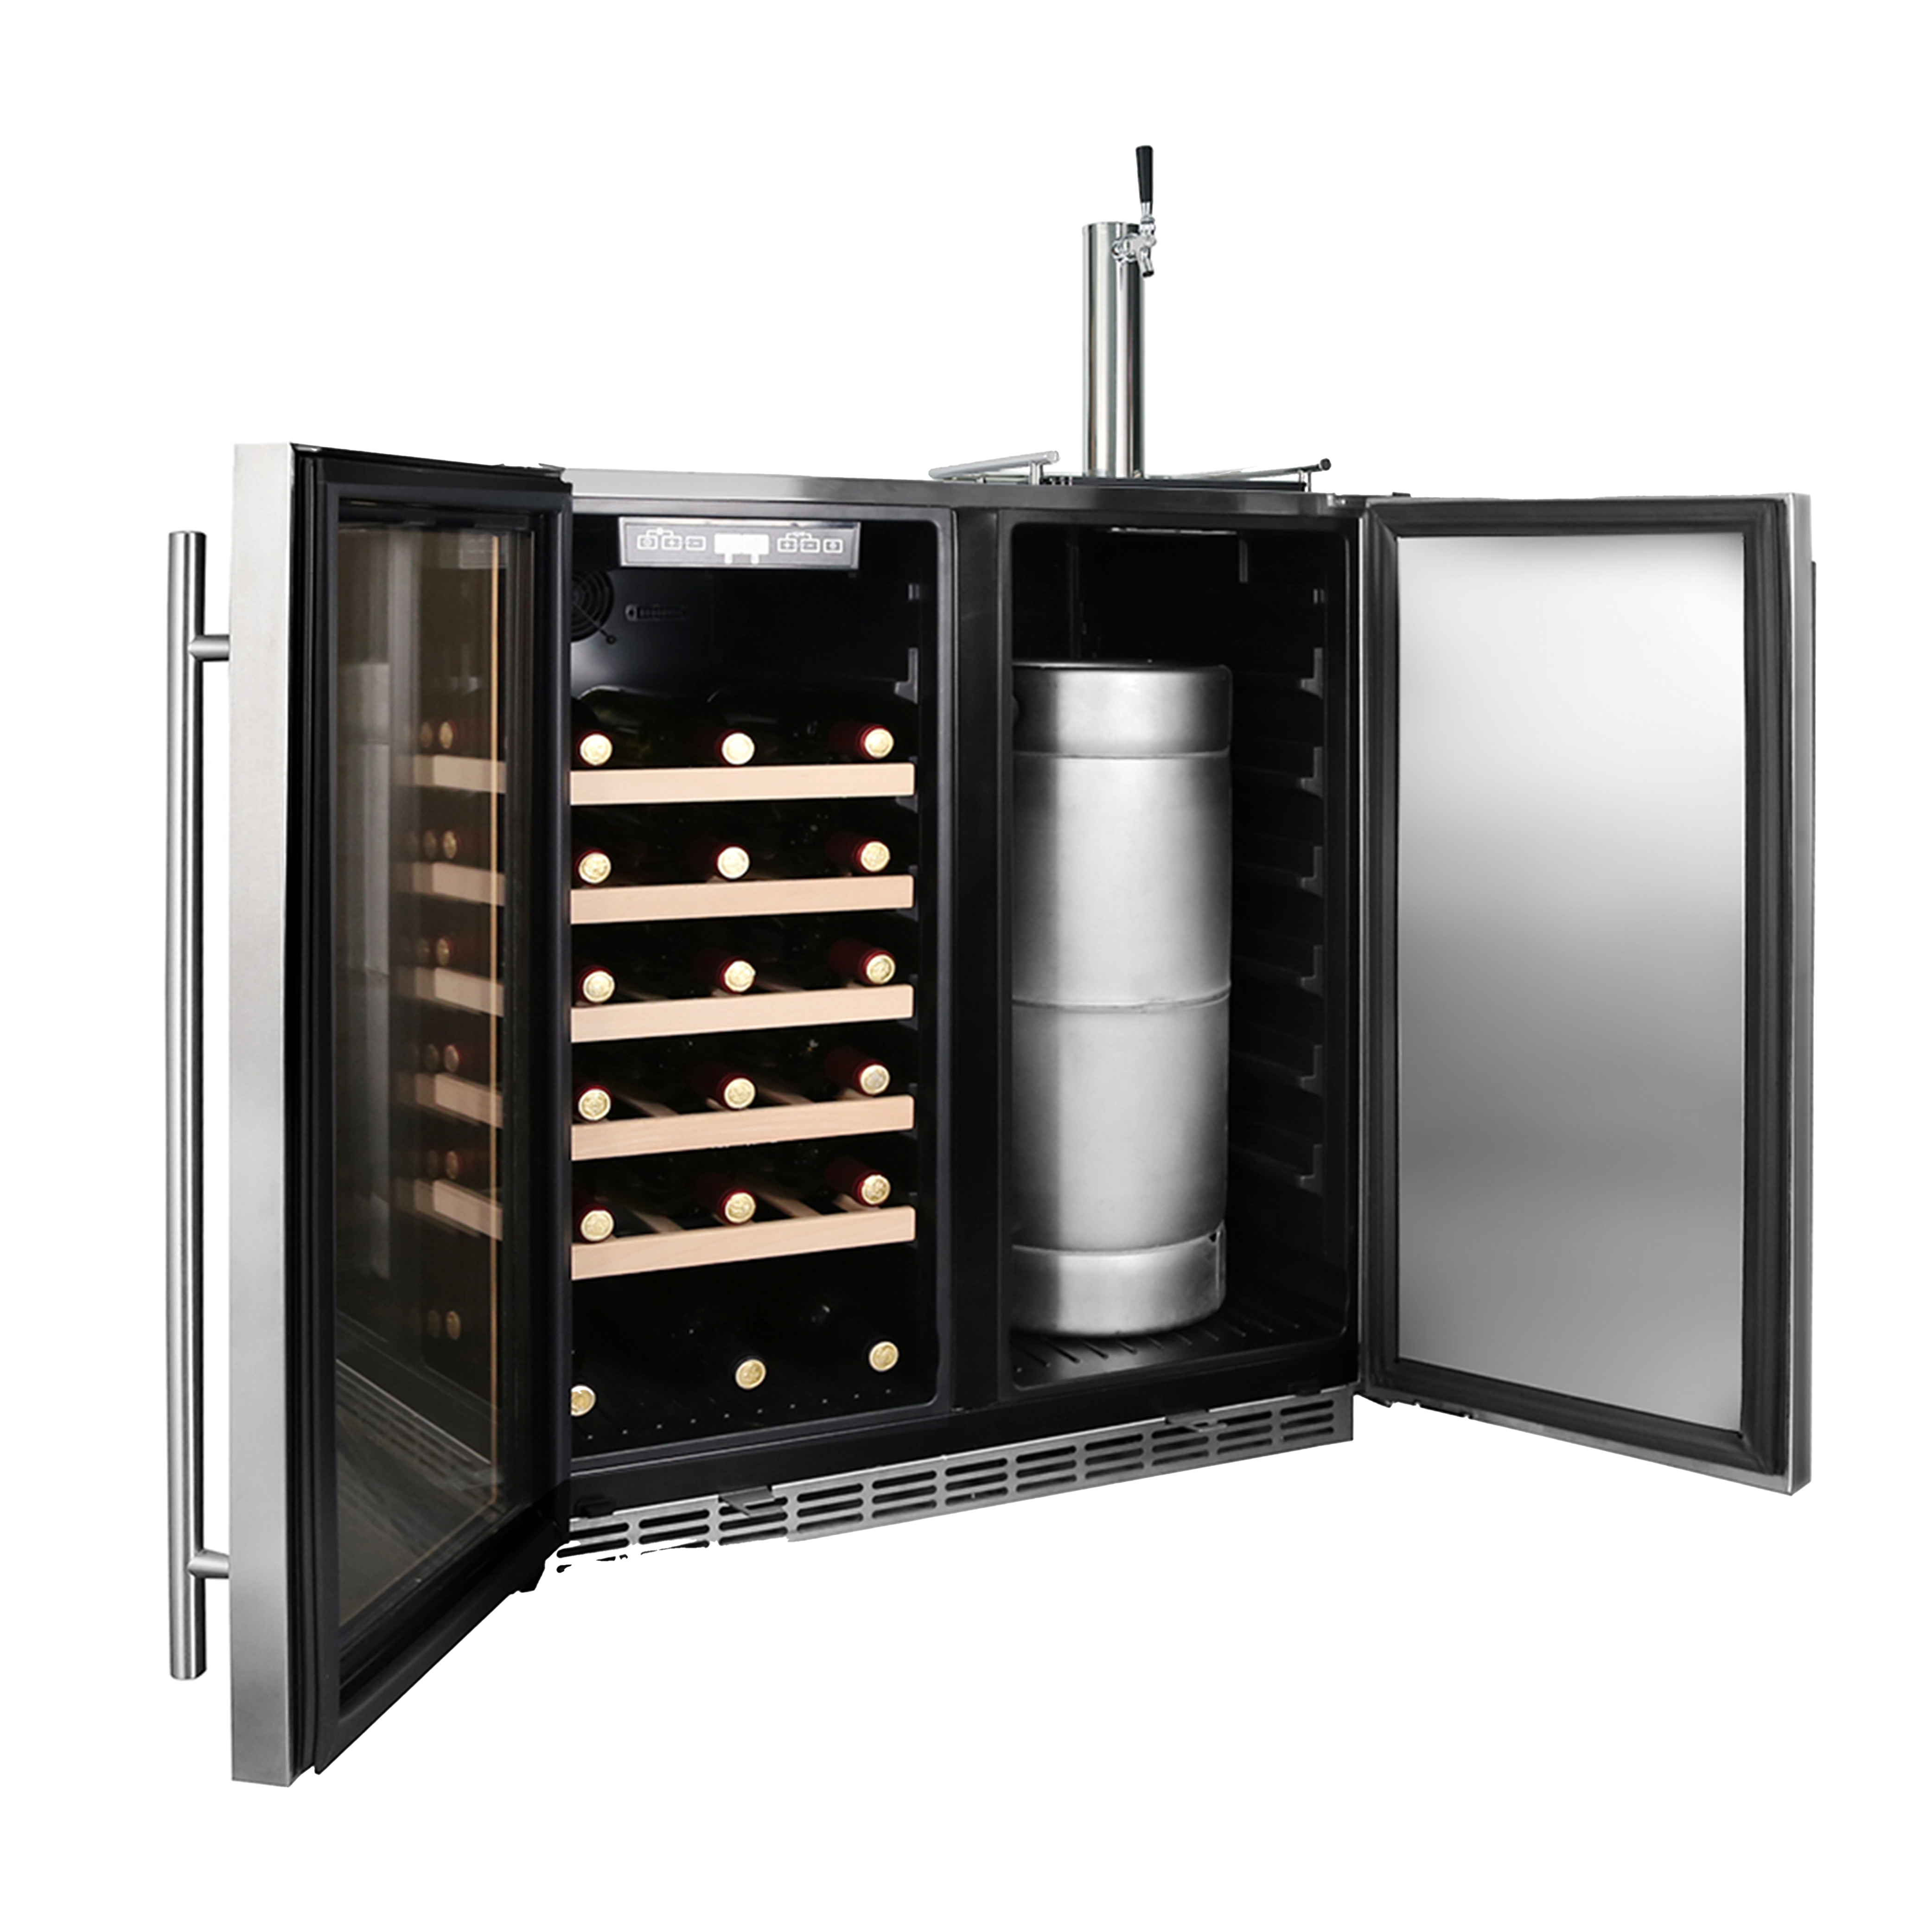 Side view of a 6.3 Cu Ft Wine Outdoor Refrigerator With Single Tap Kegerator with both doors open, revealing two compartments. The first compartment is equipped with five wooden shelves fully stocked with bottles of wine, while the second compartment contains a stainless steel keg